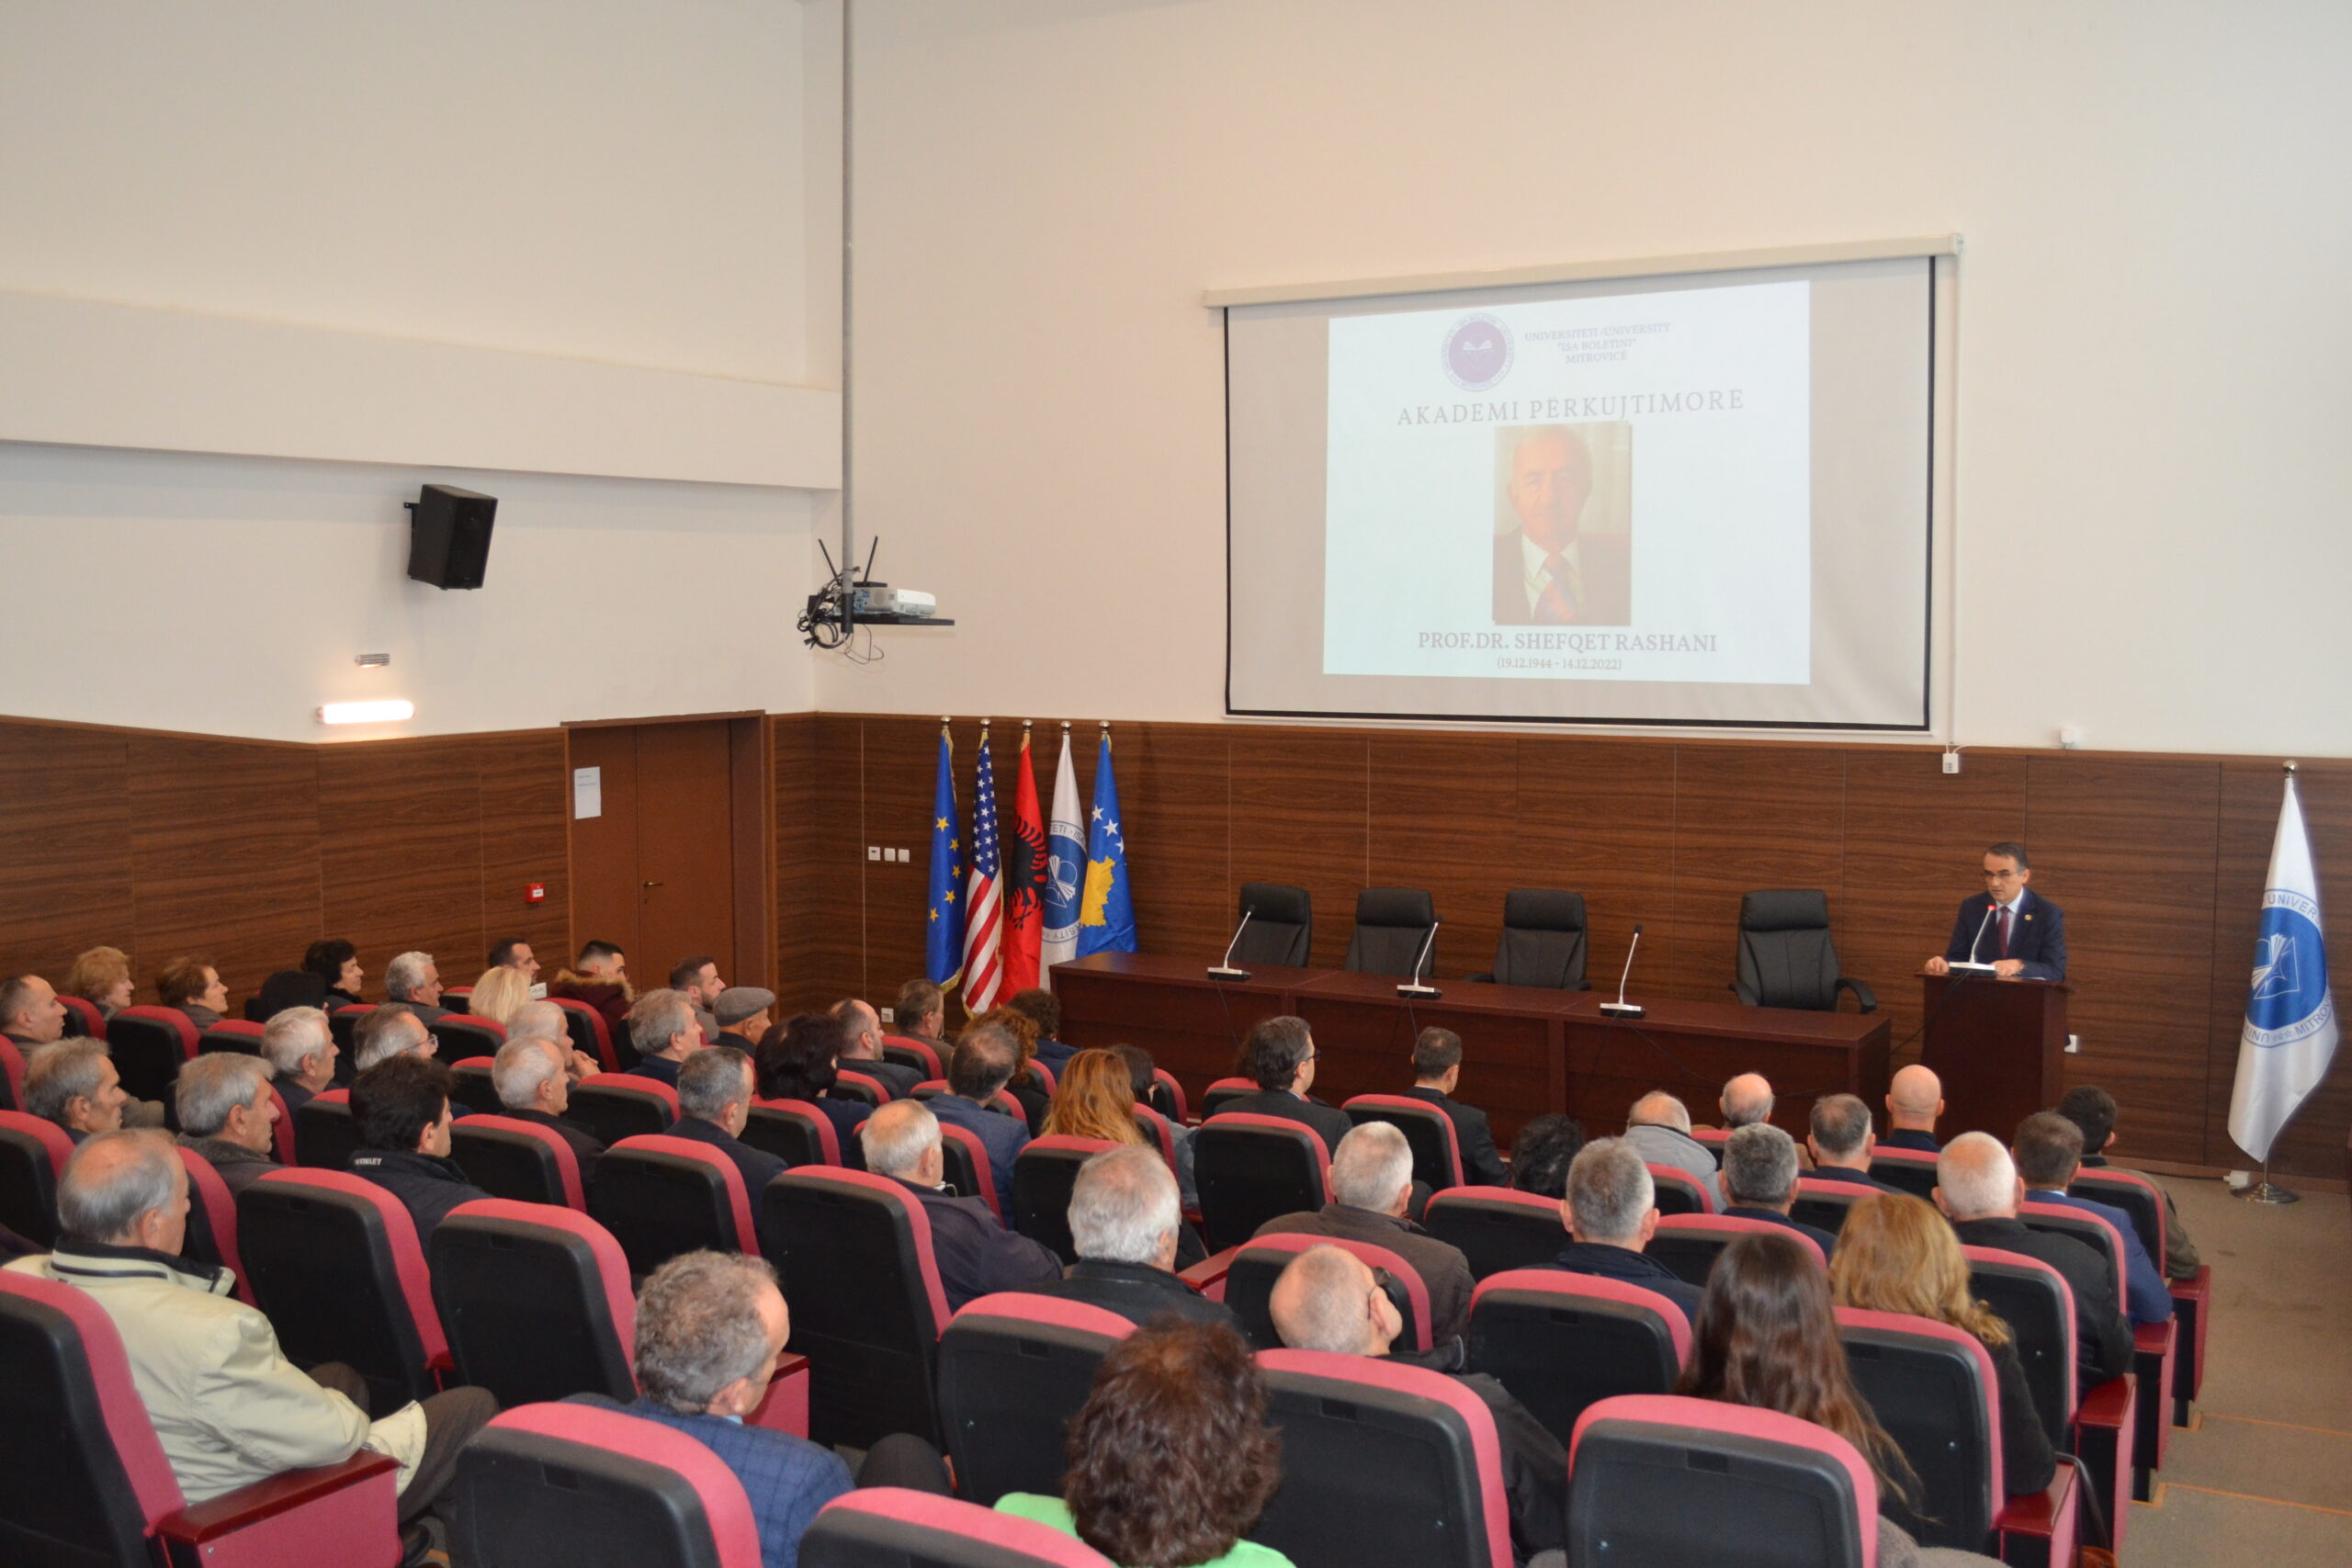 The Memorial Academy Was Held For Prof.dr. Shefqet Rashani